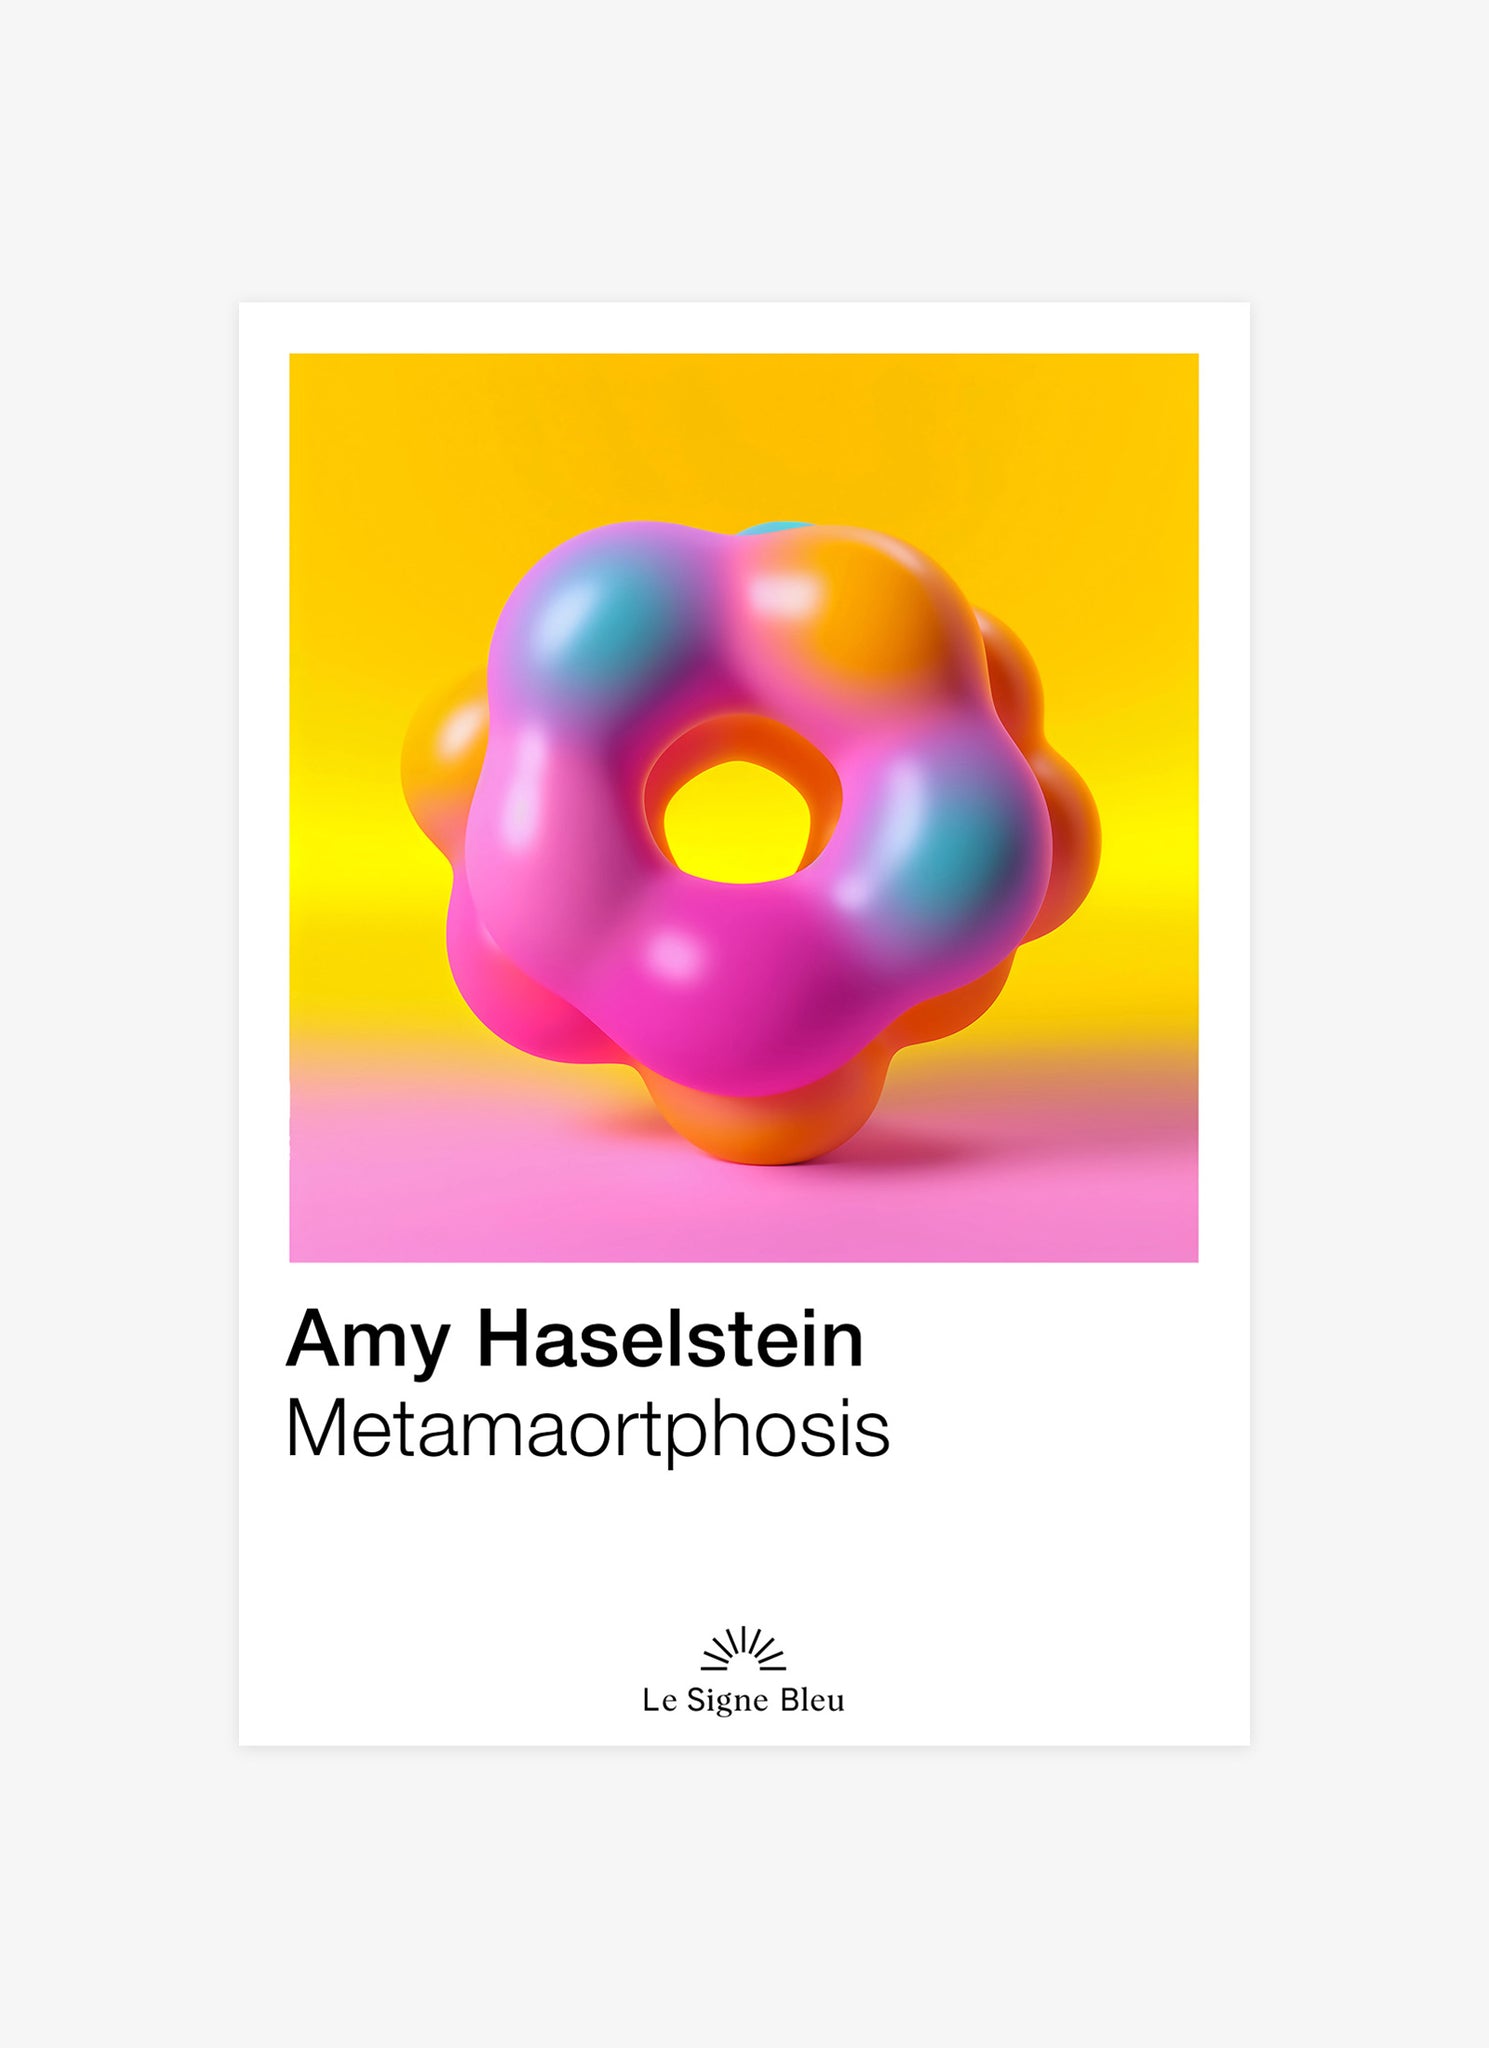 Amy Haselstein - Metamorphosis 02 Poster (open edition poster)